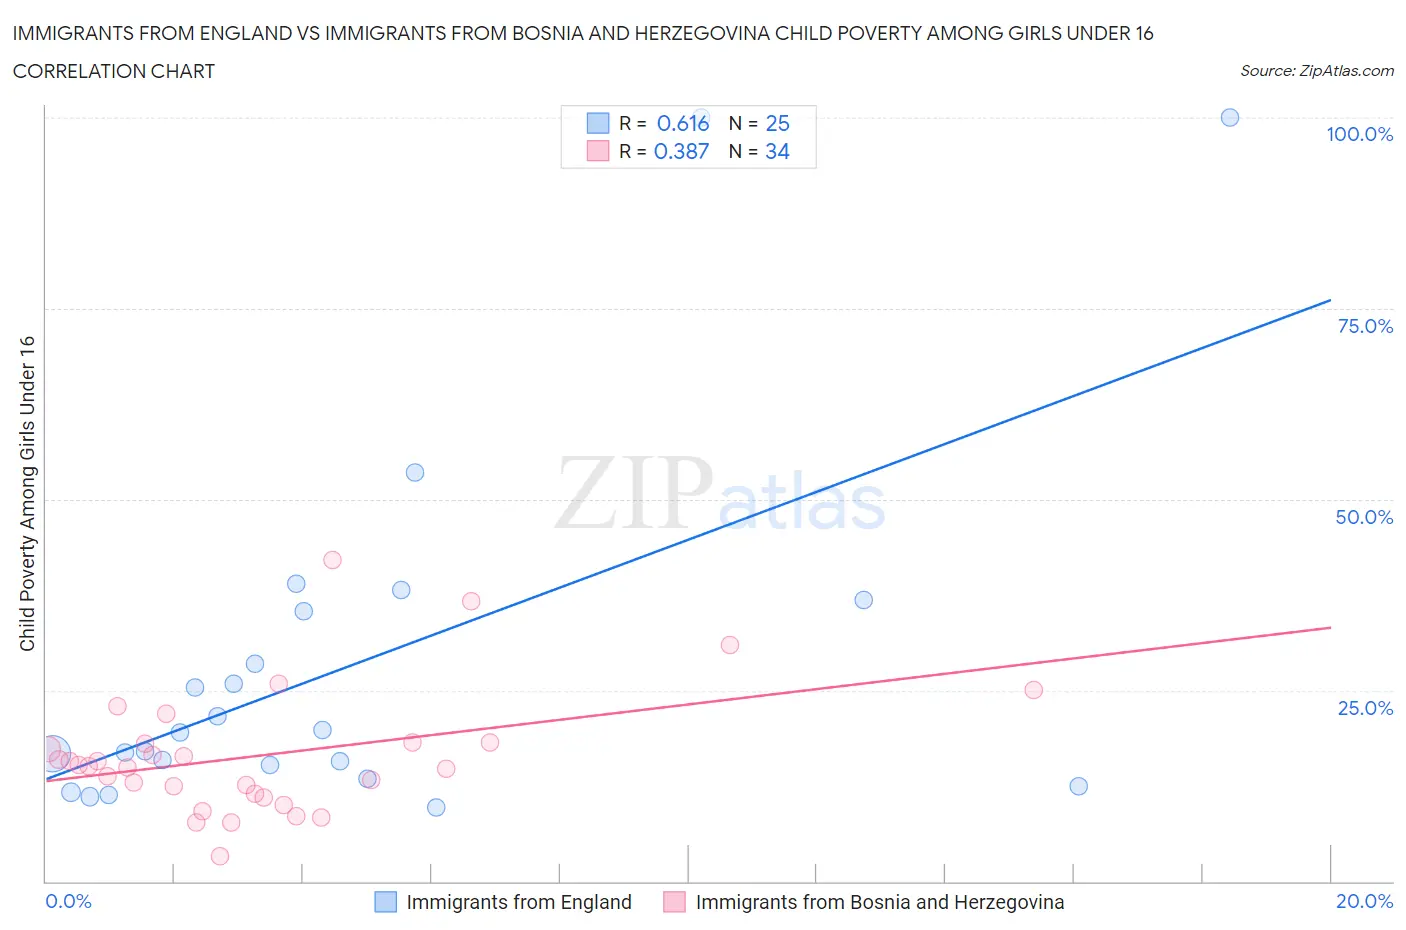 Immigrants from England vs Immigrants from Bosnia and Herzegovina Child Poverty Among Girls Under 16